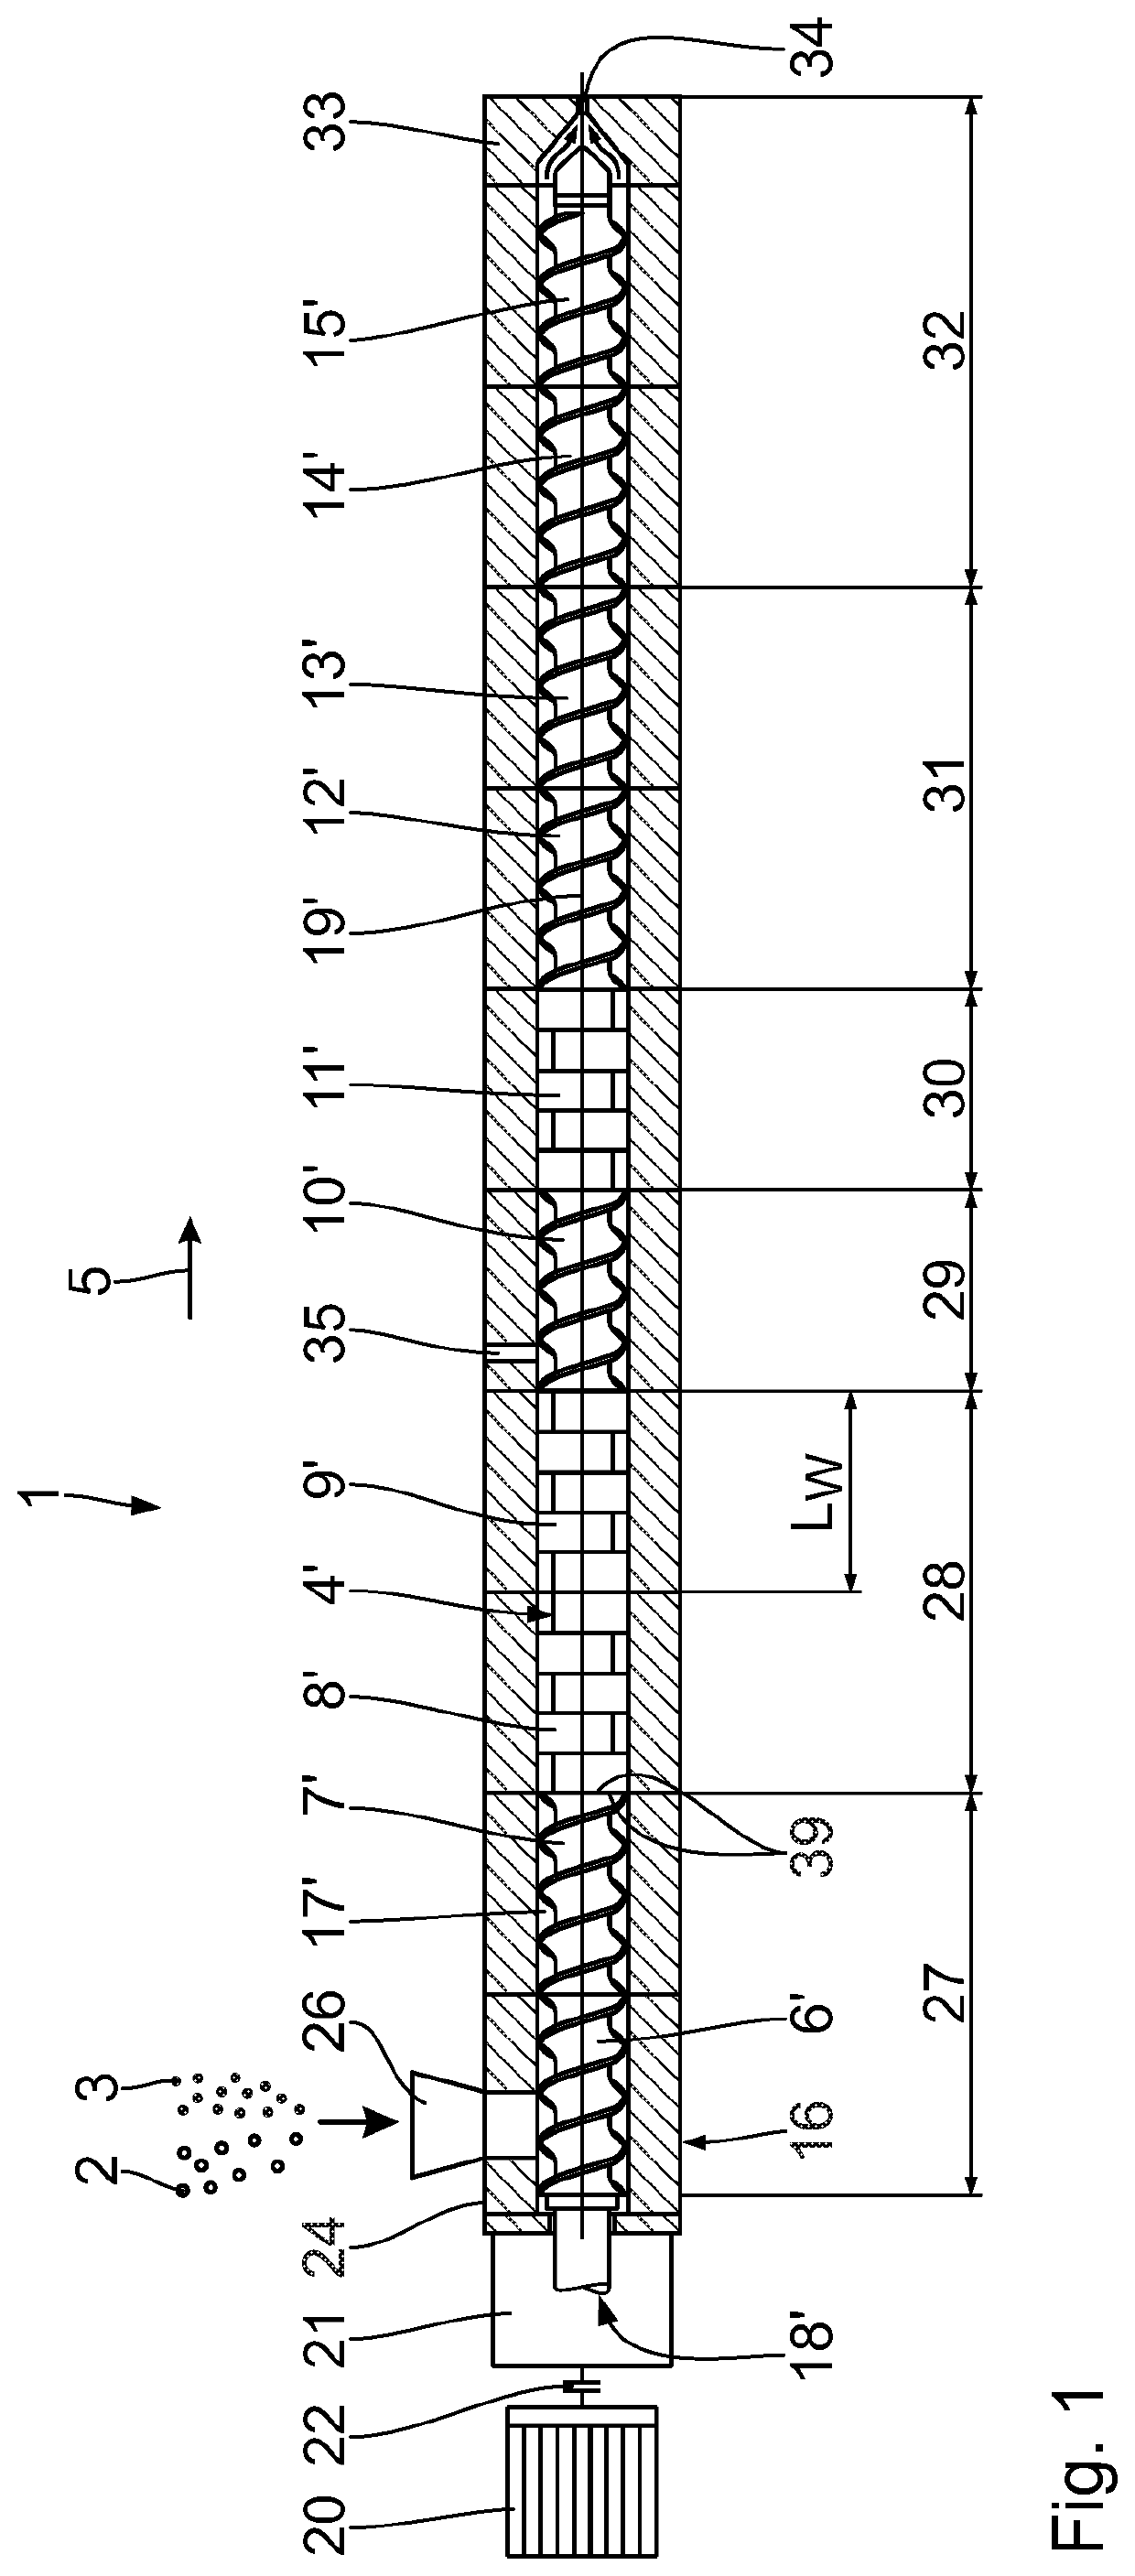 Treatment element for a treatment element shaft of a screw machine, and method for producing a treatment element